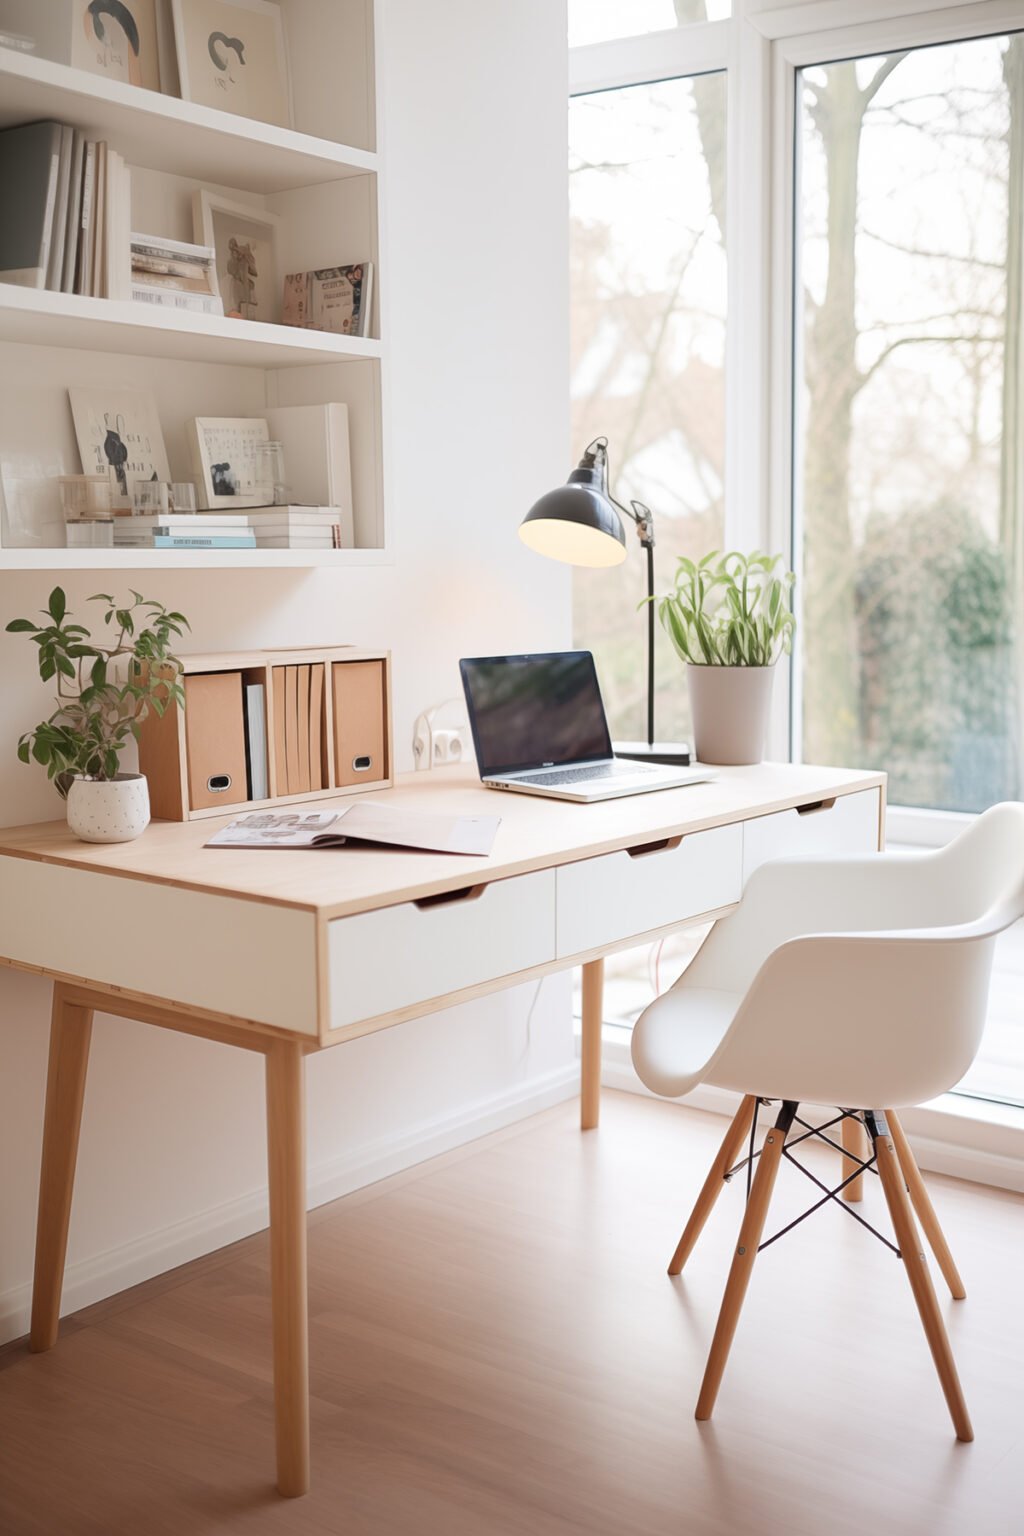 20 Small Home Office Ideas You'll Love - Jenna Kate at Home